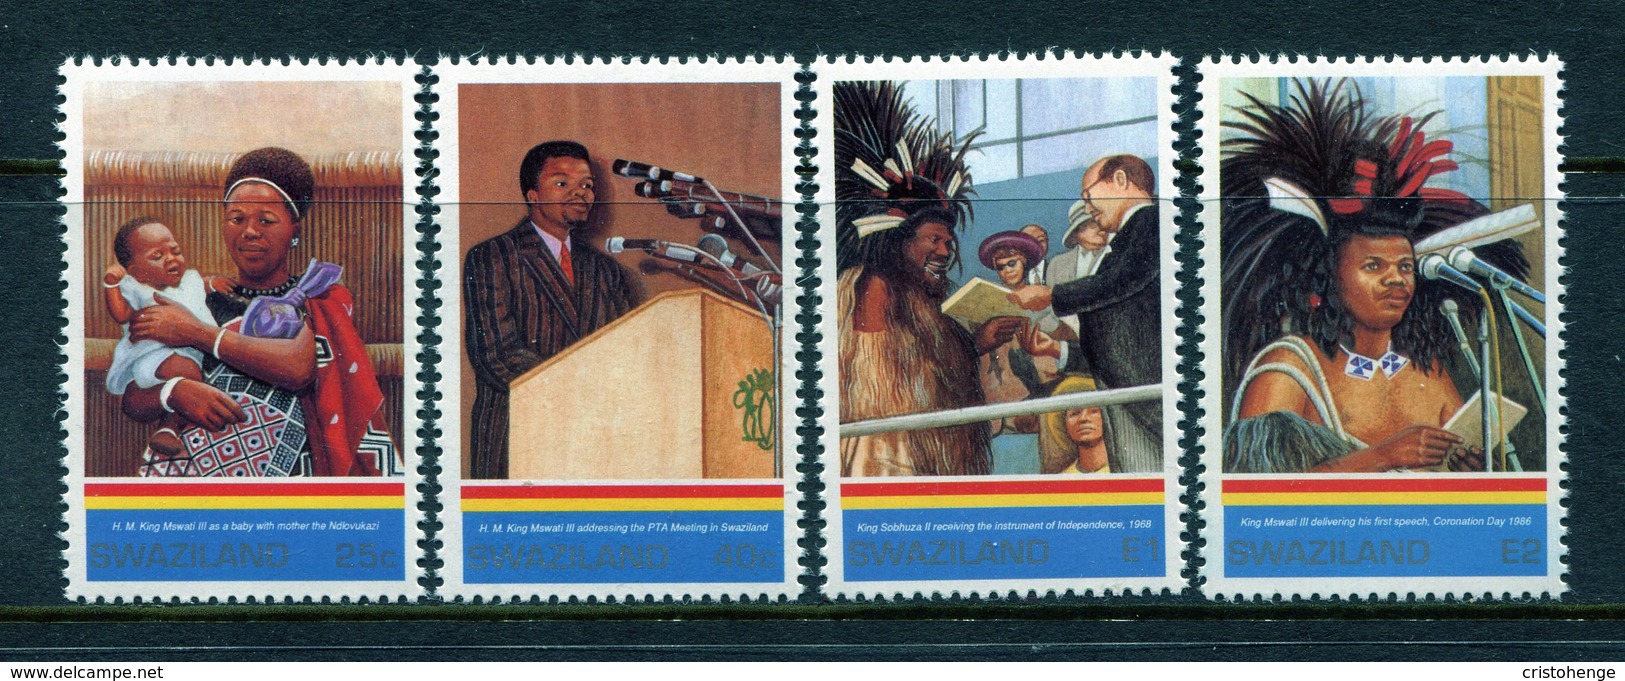 Swaziland 1993 25th Birthday Of King Mswati III And 25th Anniversary Of Independence Set MNH (SG 626-629) - Swaziland (1968-...)